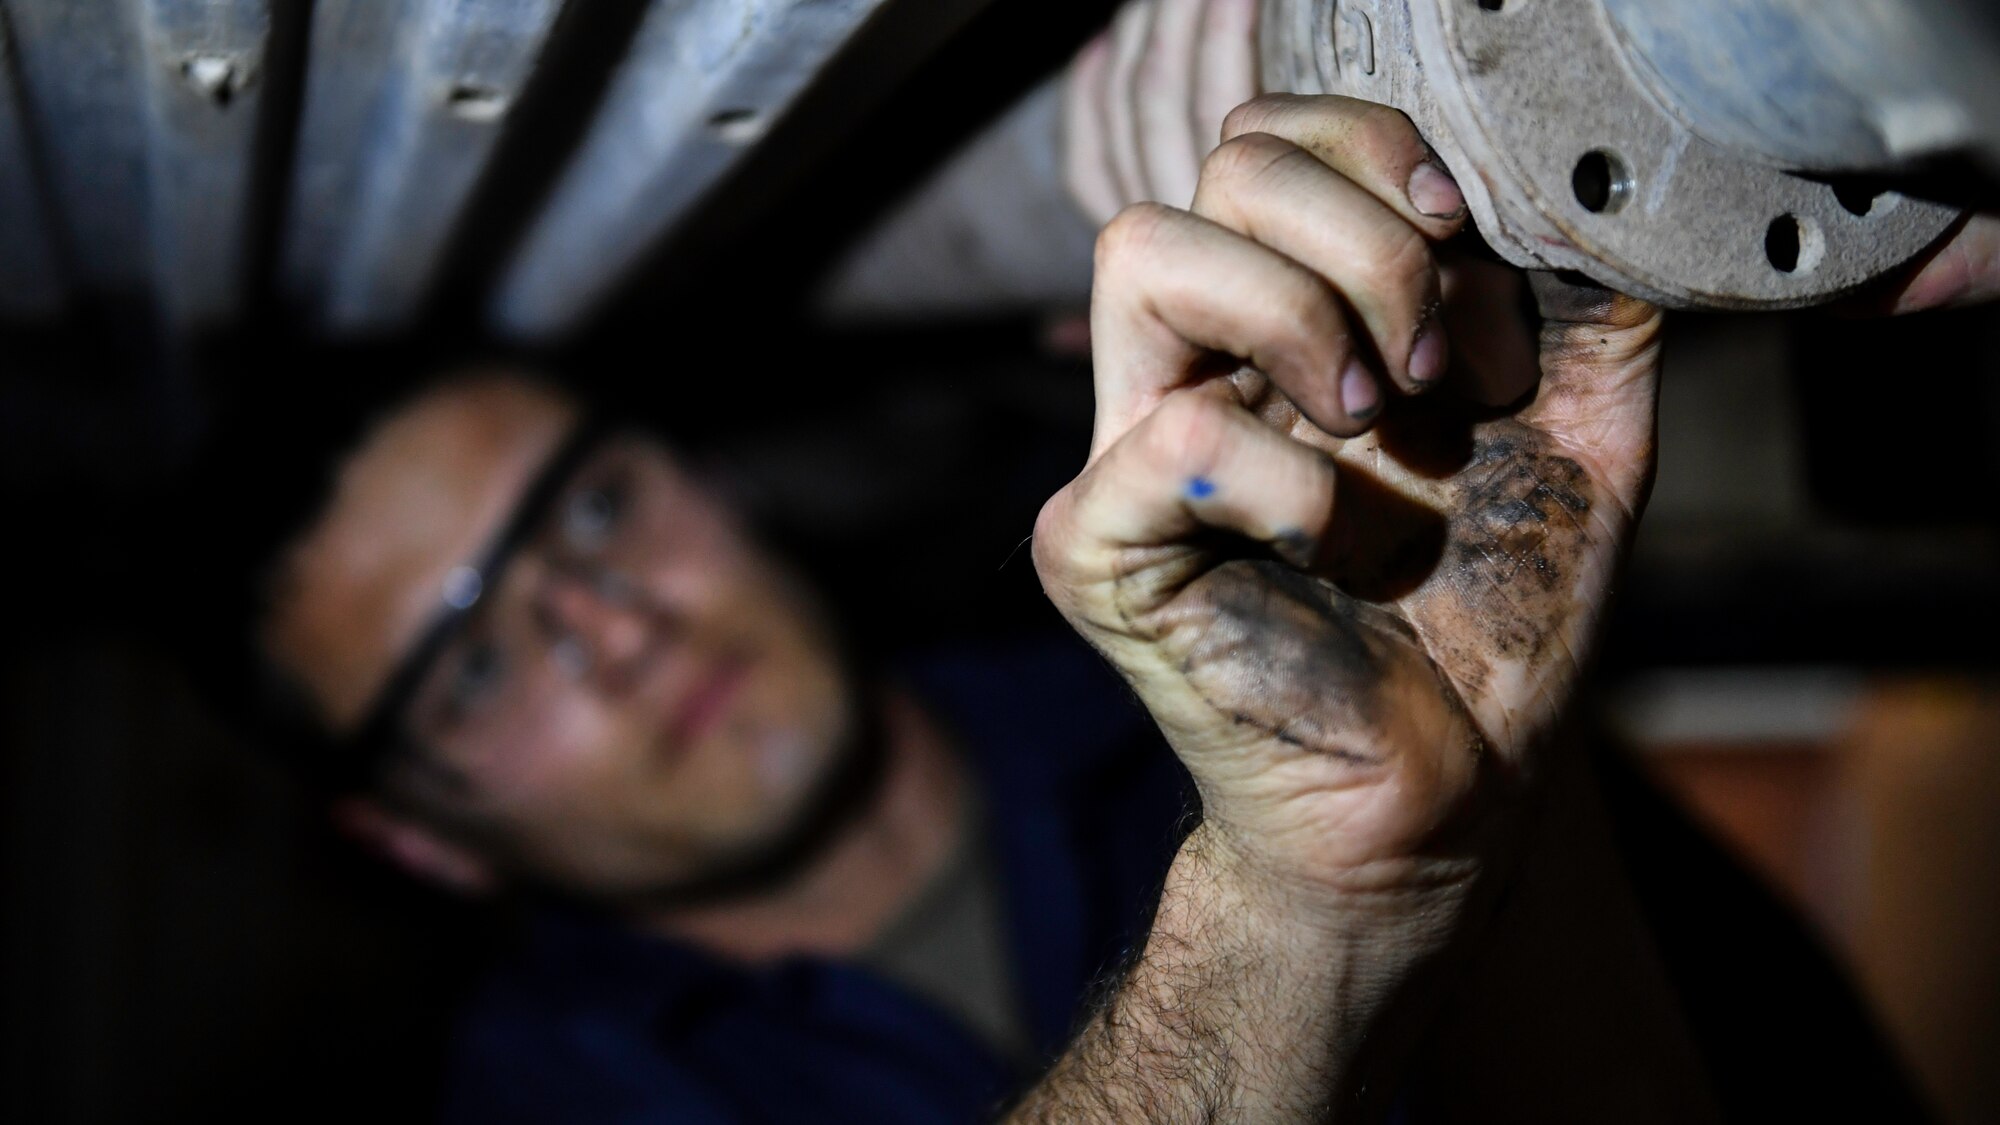 U.S. Air Force Senior Airman Darian O’Banion, 386th Expeditionary Logistics Readiness Squadron vehicle and equipment maintenance journeyman, secures a driveshaft to a vehicle with a bolt at Ali Al Salem Air Base, Kuwait, July 29, 2019. The driveshaft is a mechanical component for transmitting torque and rotation, usually used to connect other components of a drive train that cannot be connected directly because of distance or the need to allow for relative movement between them. (U.S. Air Force photo by Staff Sgt. Mozer O. Da Cunha)